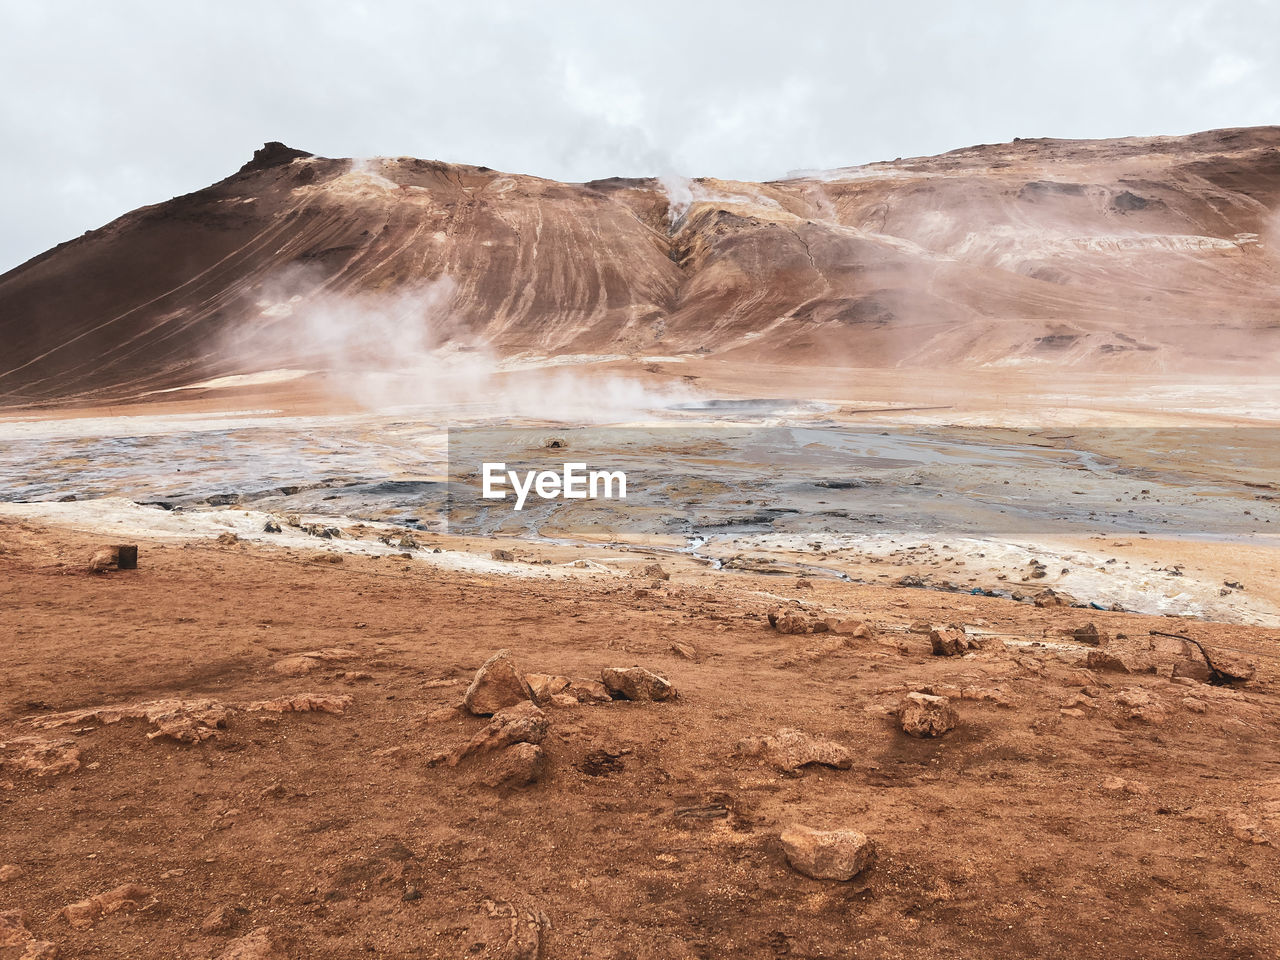 The impressive steaming geothermal fields of hverir in iceland